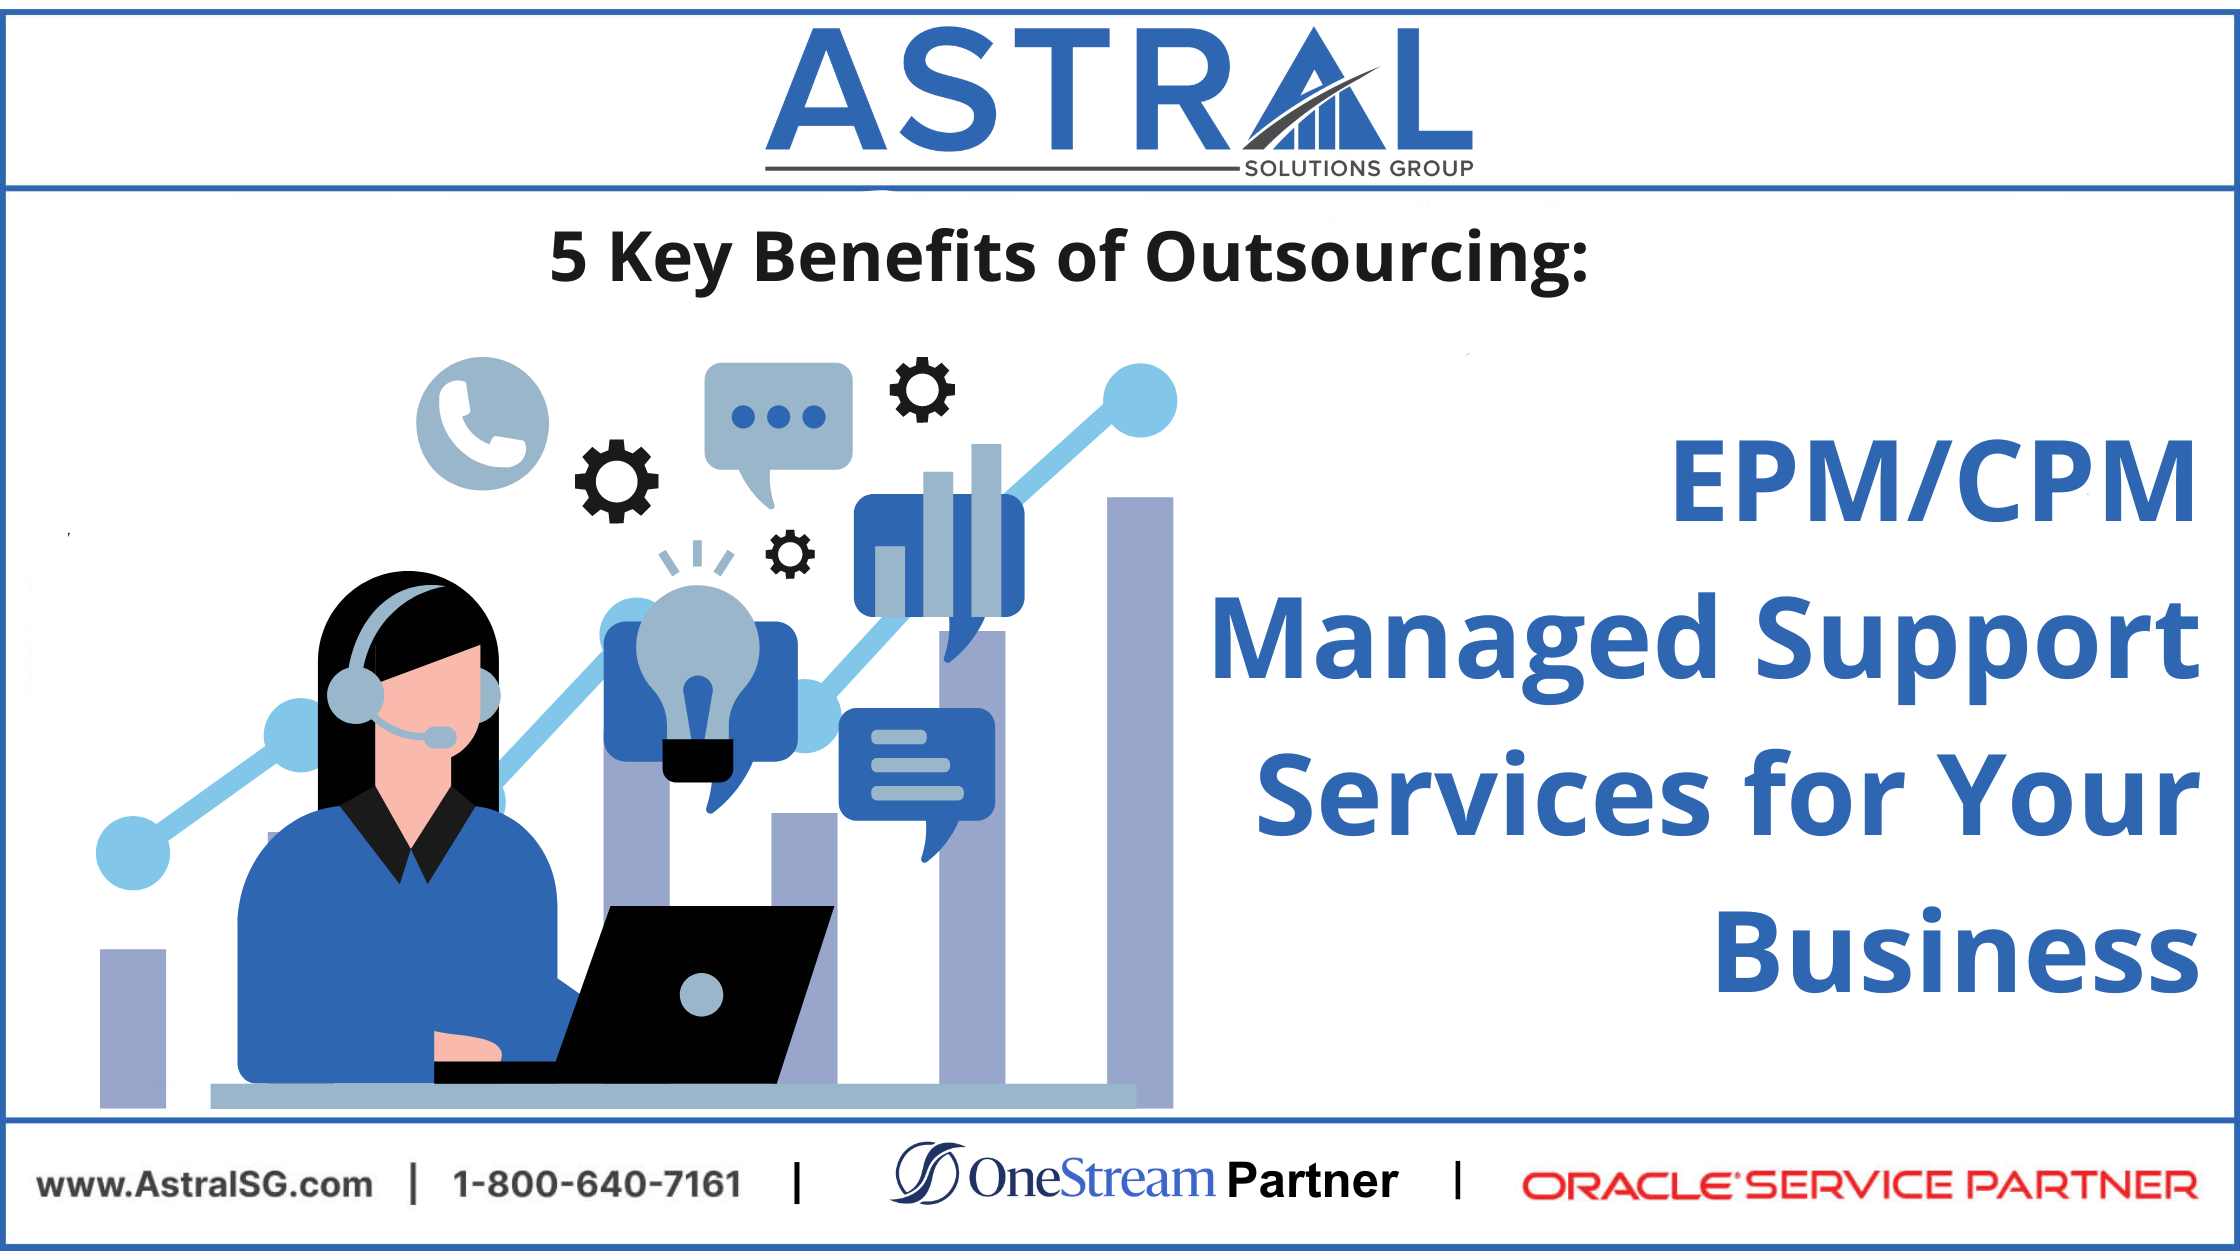 Maximizing Efficiency: 5 Key Benefits of Outsourcing EPM/CPM Managed Support Services for Your Business